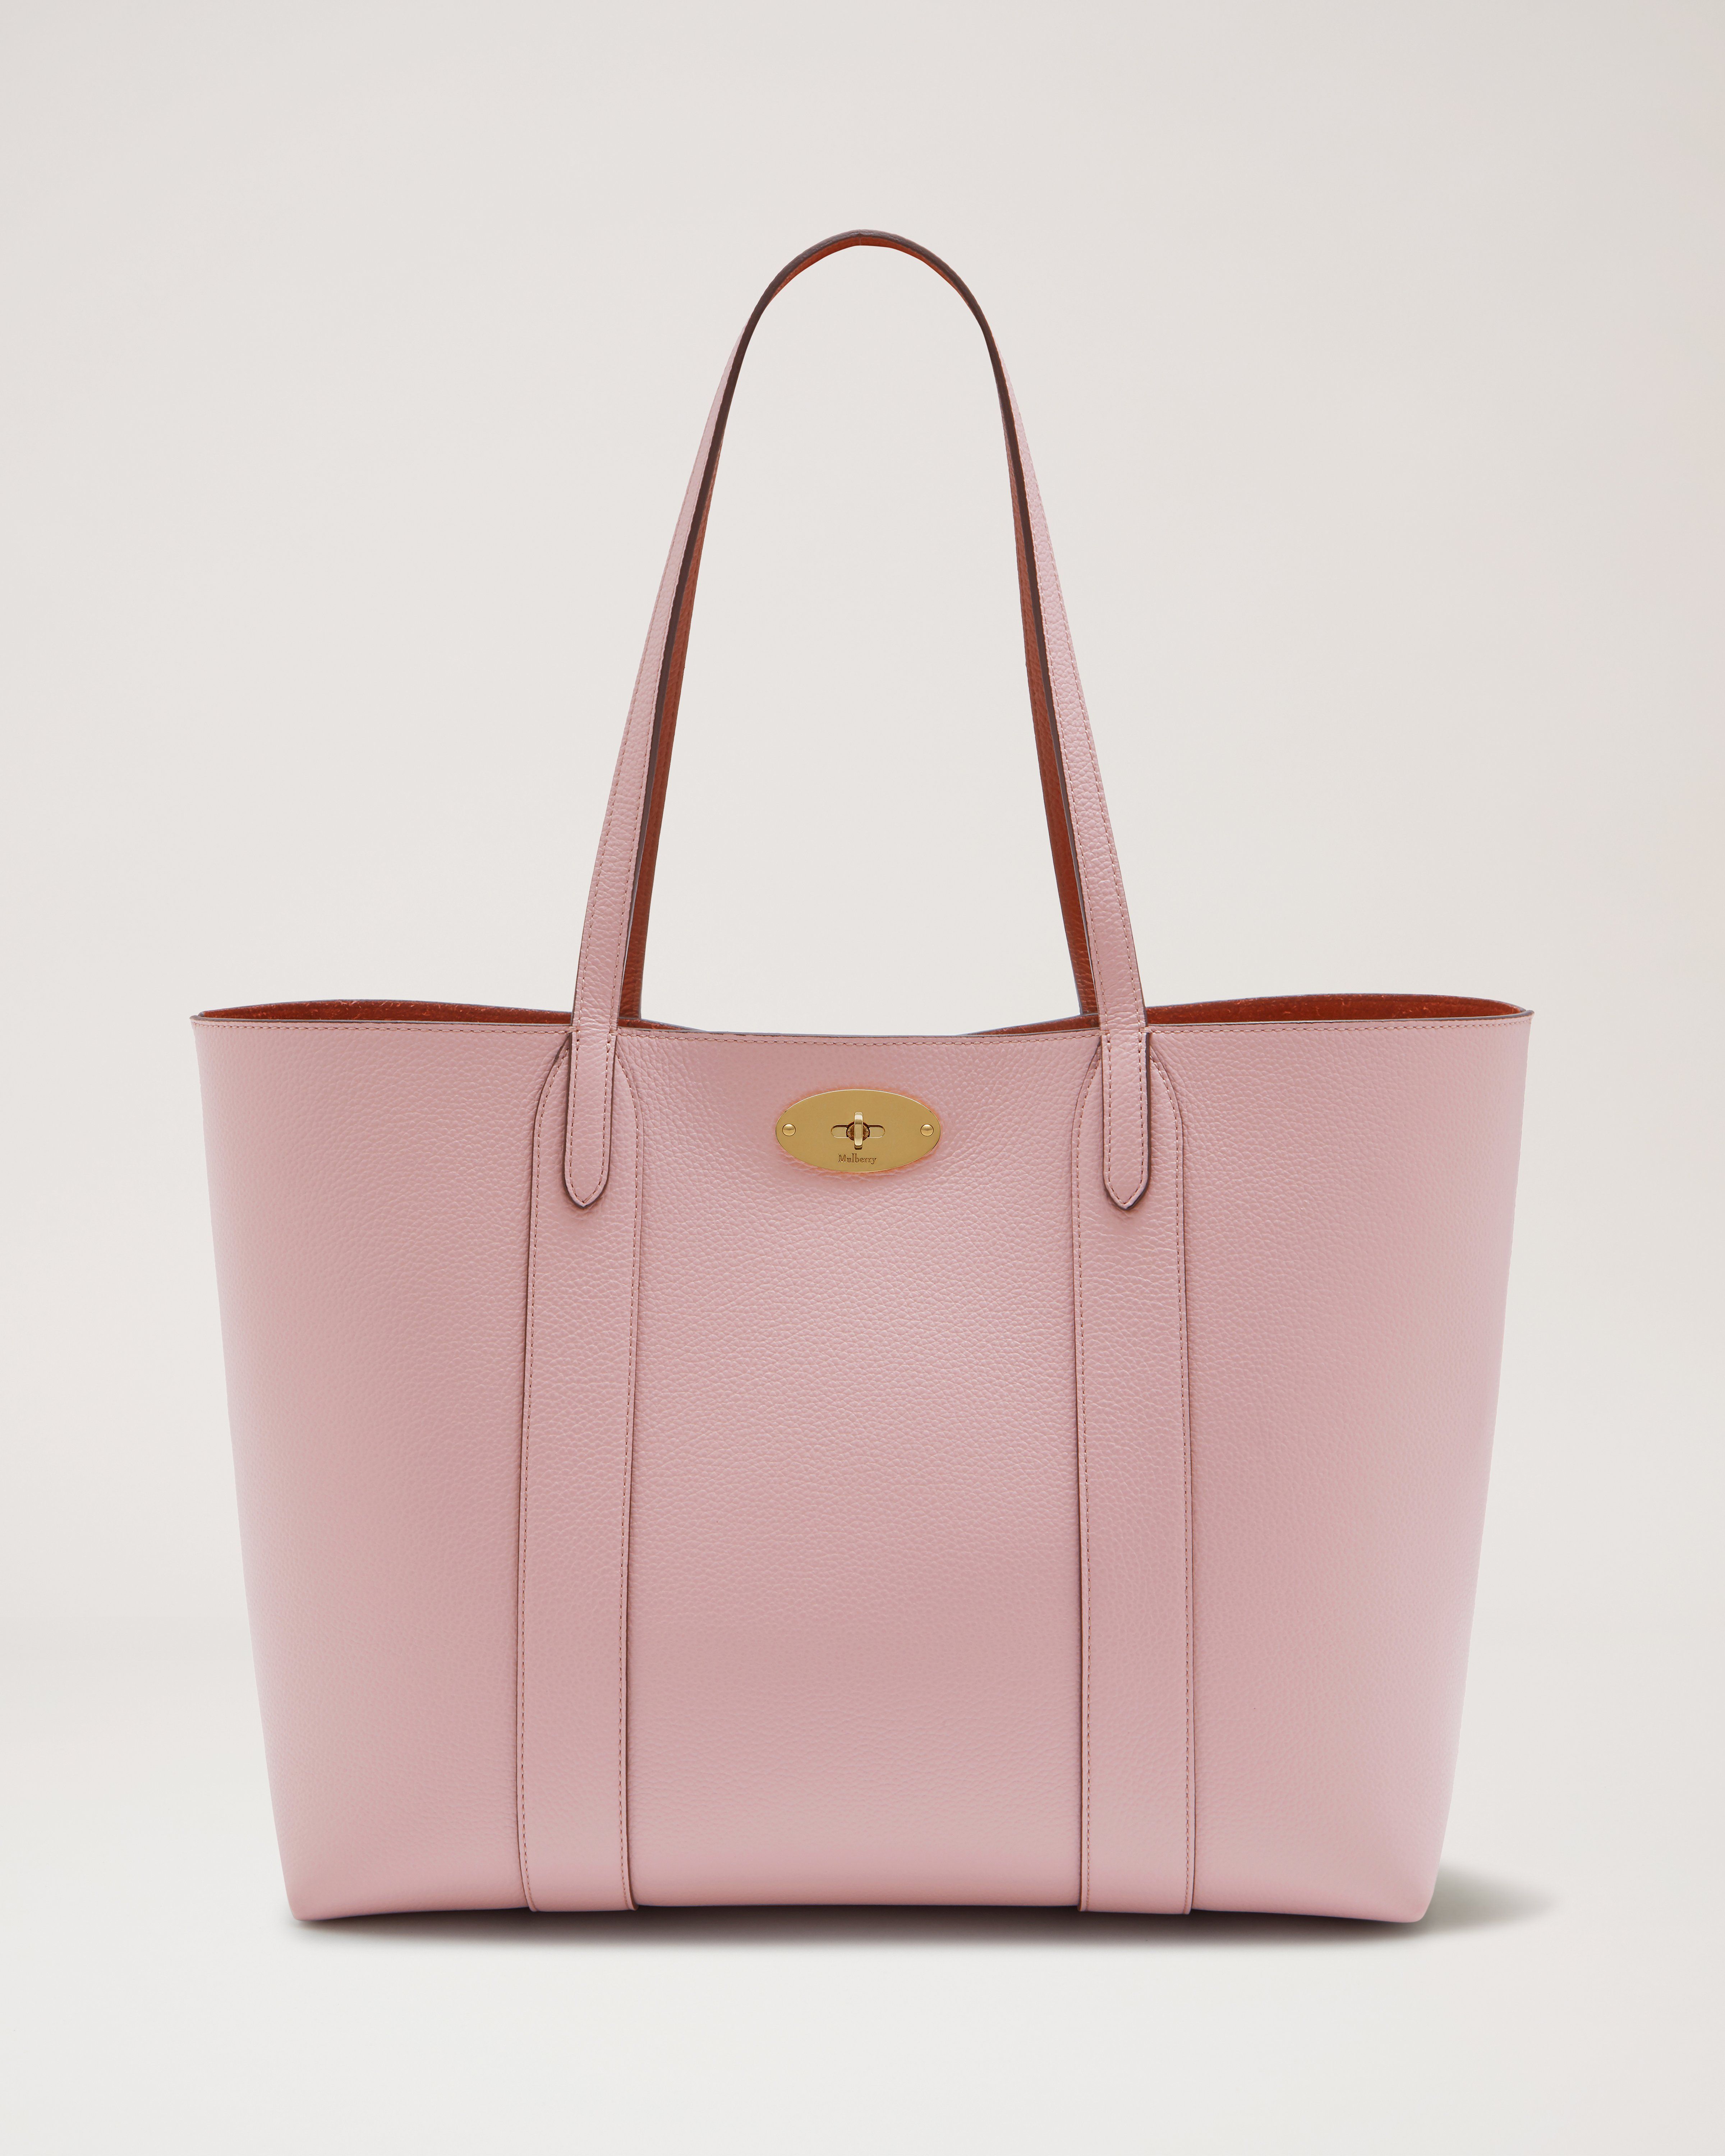 Bayswater Tote | Powder Pink Small Classic Grain | Bayswater | Mulberry